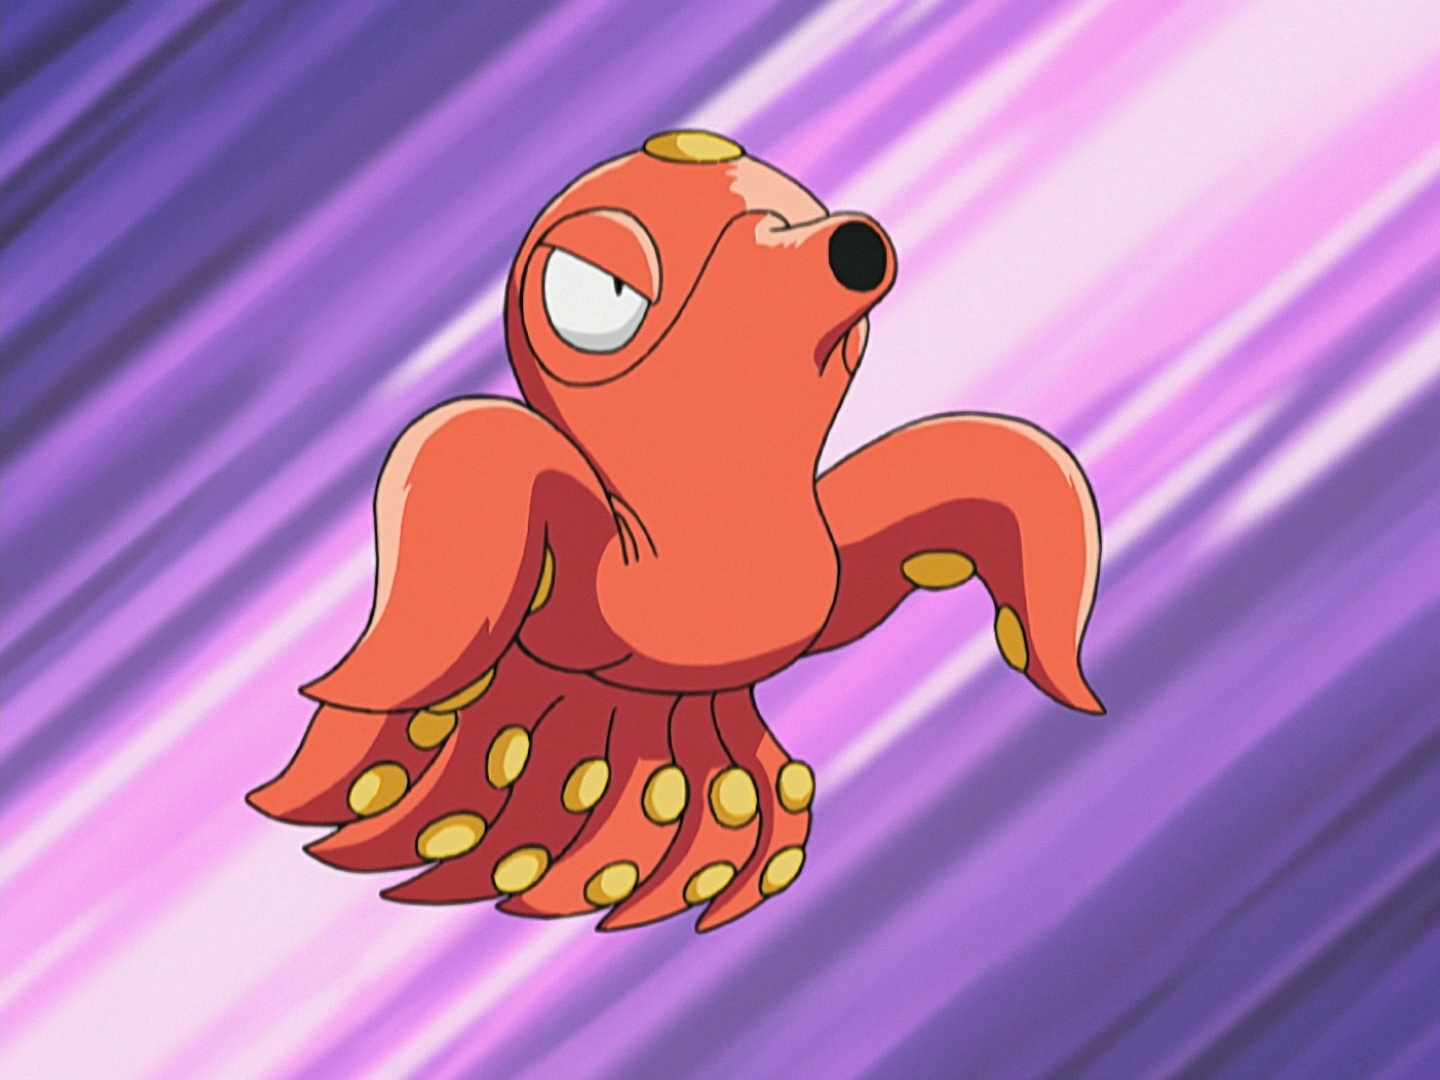 http://img3.wikia.nocookie.net/__cb20100605230431/pokemon/images/2/2d/Harley_Octillery.png